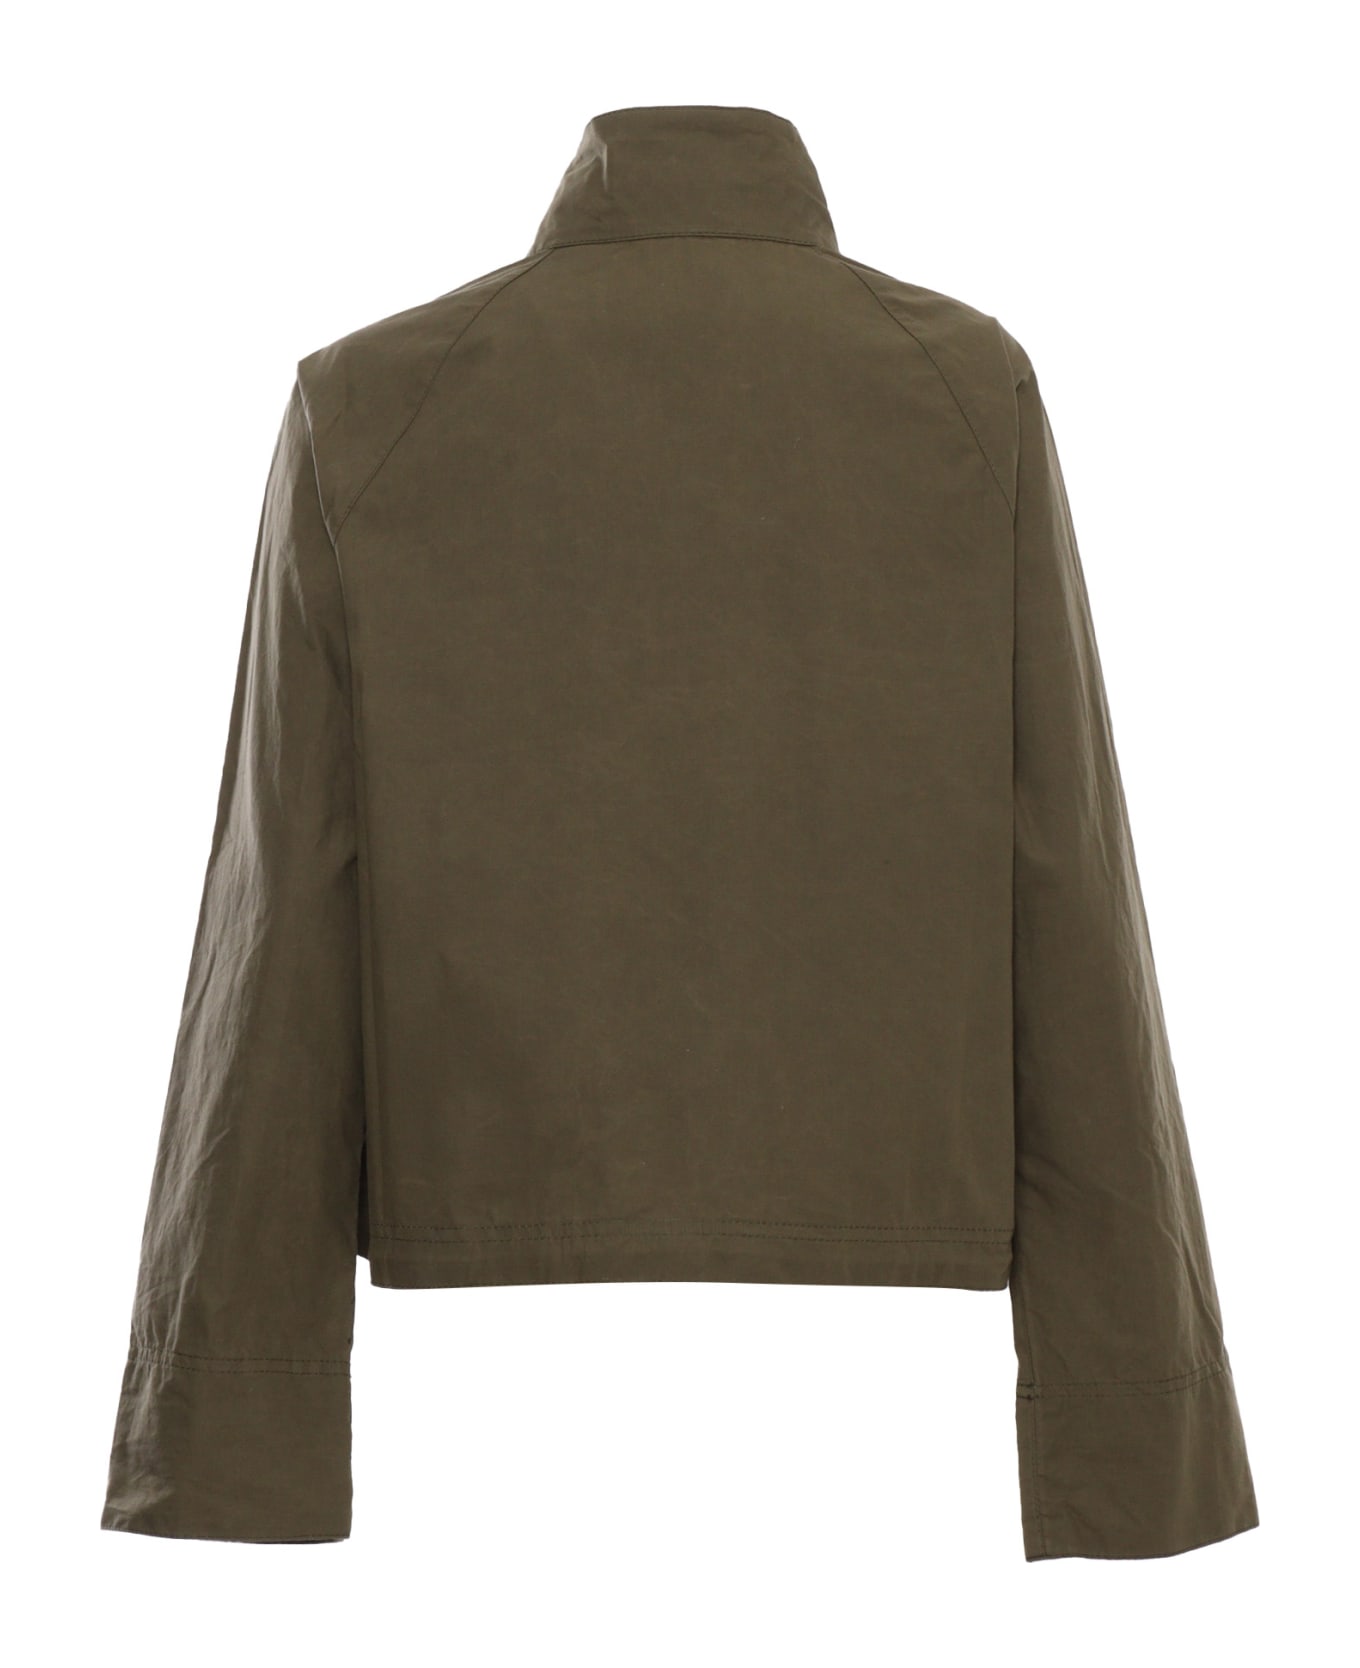 Barbour Military Green Jacket - GREEN ジャケット